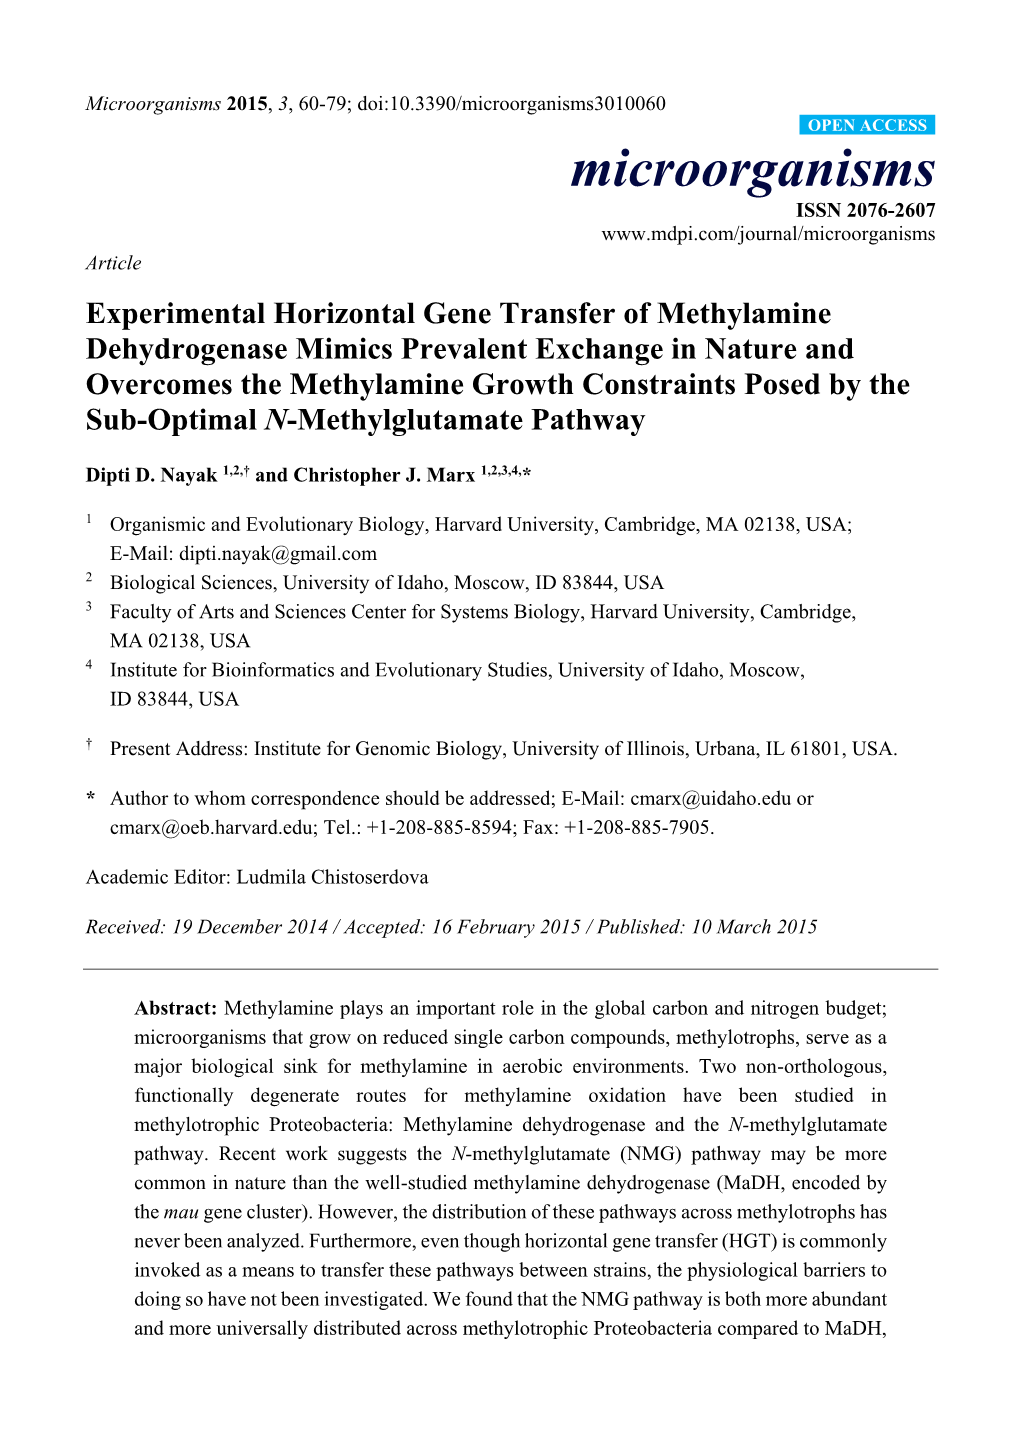 Experimental Horizontal Gene Transfer of Methylamine Dehydrogenase Mimics Prevalent Exchange in Nature and Overcomes the Methylamine Growth Constraints Posed by the Sub